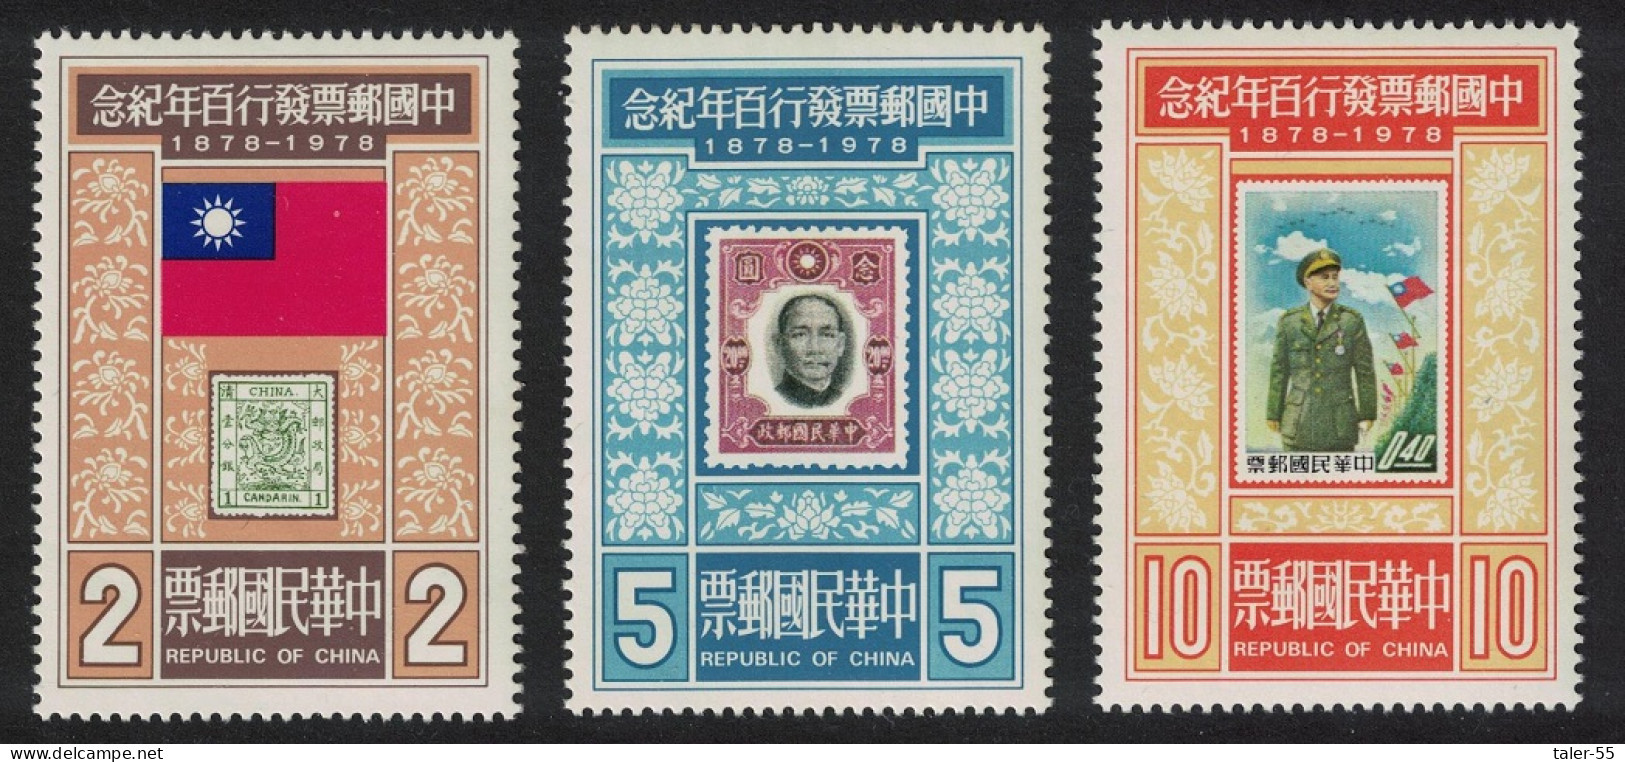 Taiwan Centenary Of Chinese Postage Stamp 3v 1978 MNH SG#1188-1190 - Nuovi